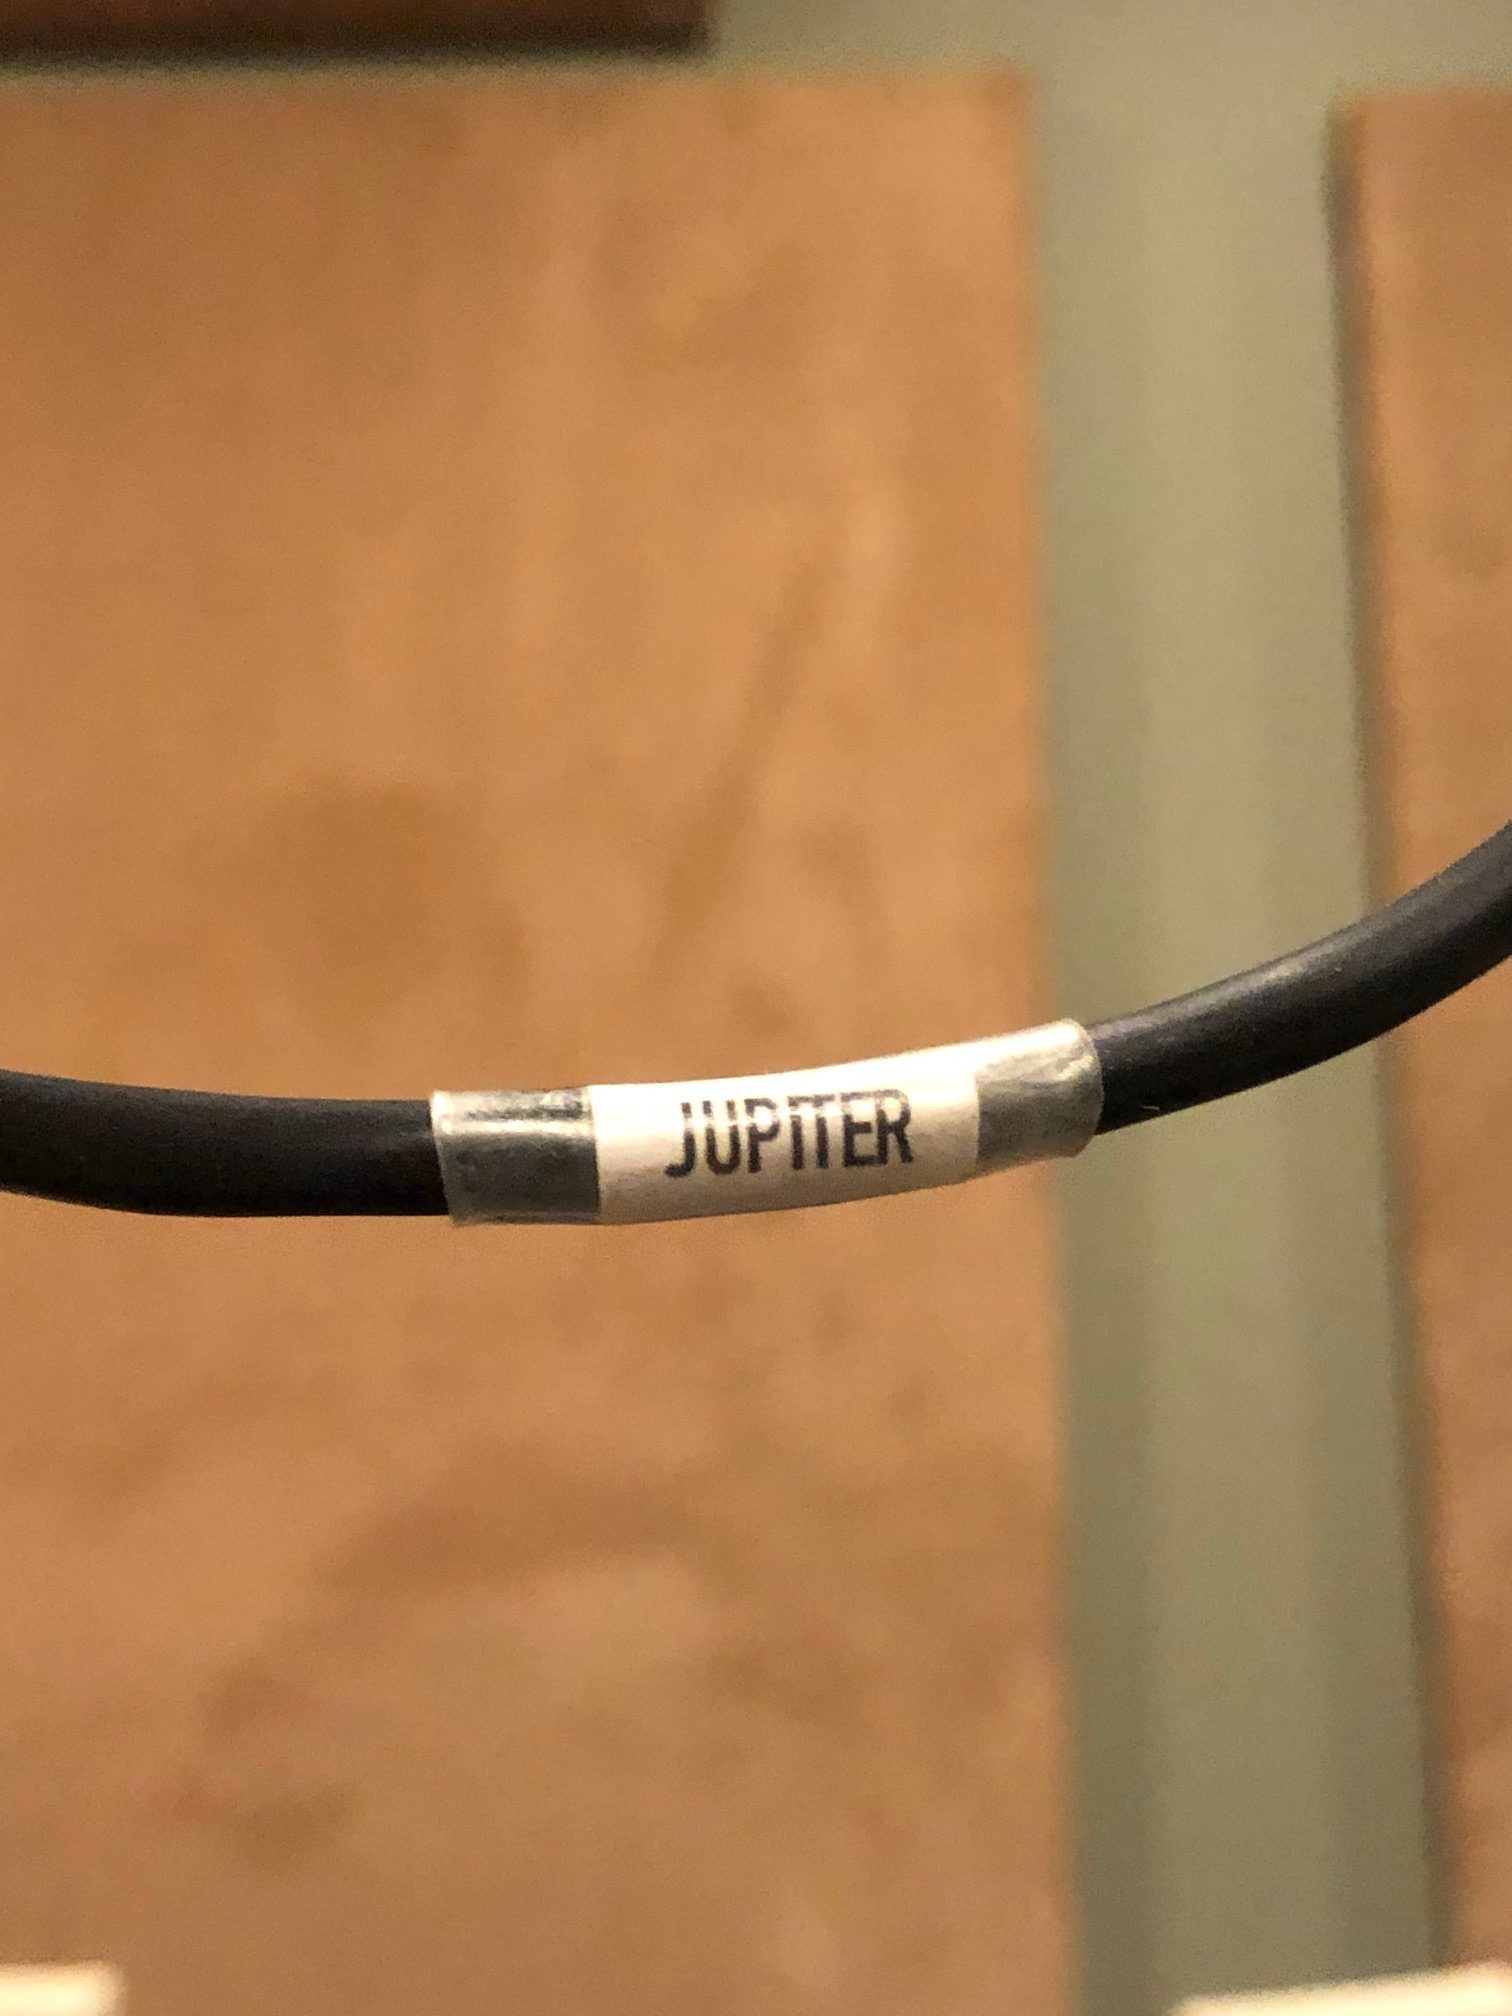 How to label your cables